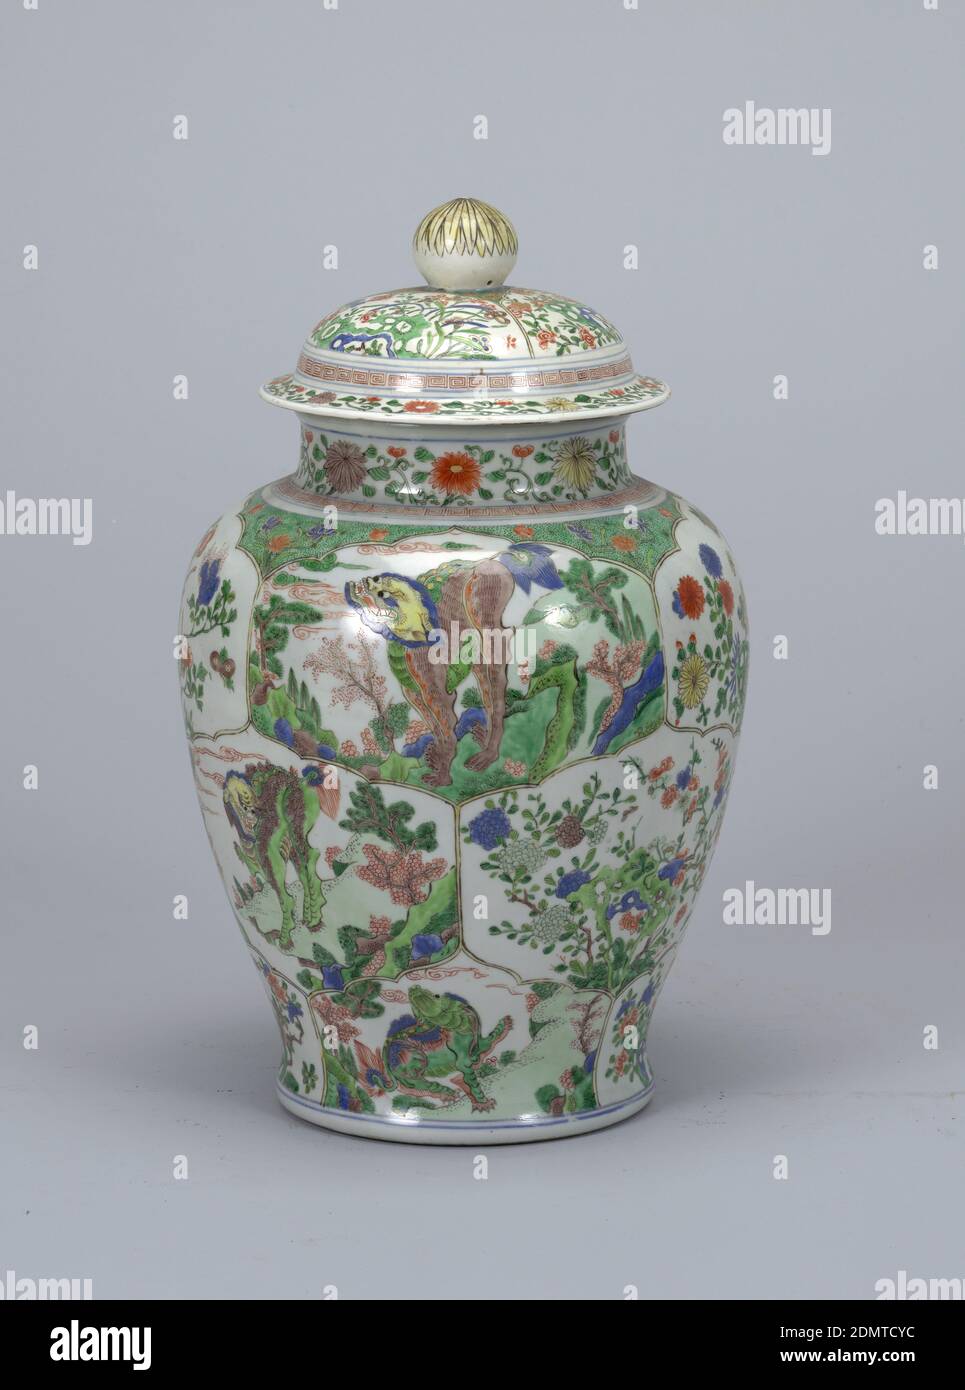 Ginger Jar, porcelain, porcelain enamel, Porcelain vase and cover with nature scenes and flowers along the sides and cover., China, 19th century, ceramics, Decorative Arts, jar, jar Stock Photo